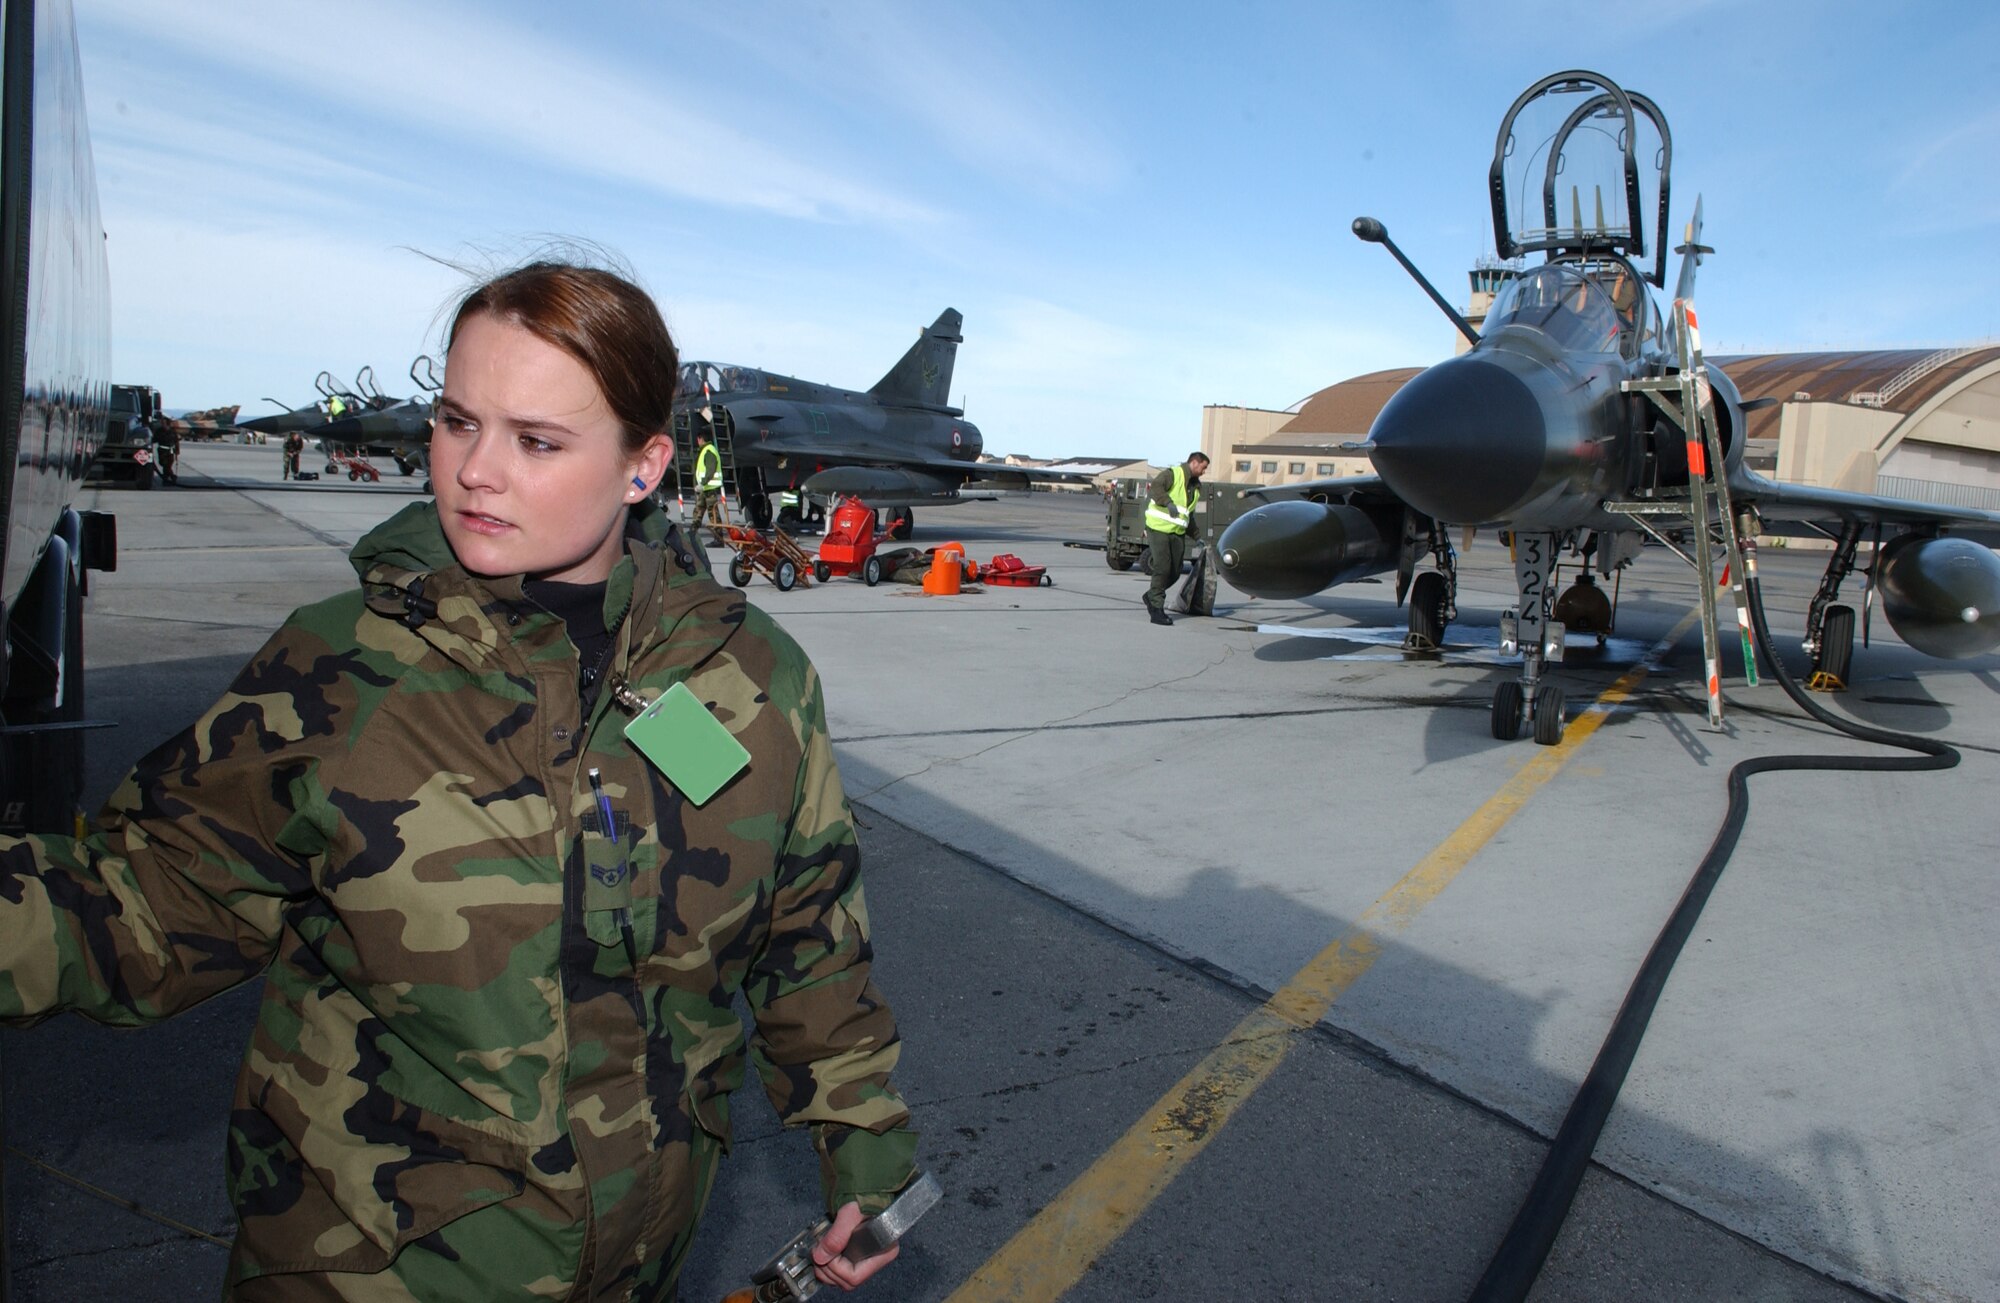 EIELSON AIR FORCE BASE, Alaska -- Airman 1st Class Ashley Pranther, 374th Logistics Readiness Squadron, Yokota AB, refuels a Mirage 2000 with 1500 gallons gasoline on April 6 during Red Flag-Alaska 07-1. This exercise provides unique opportunities to help integrate various forces into joint, coalition, and bilateral training from simulated forward operating bases. (U.S. Air Force Photo by Airman 1st Class Jonathan Snyder) (Released)